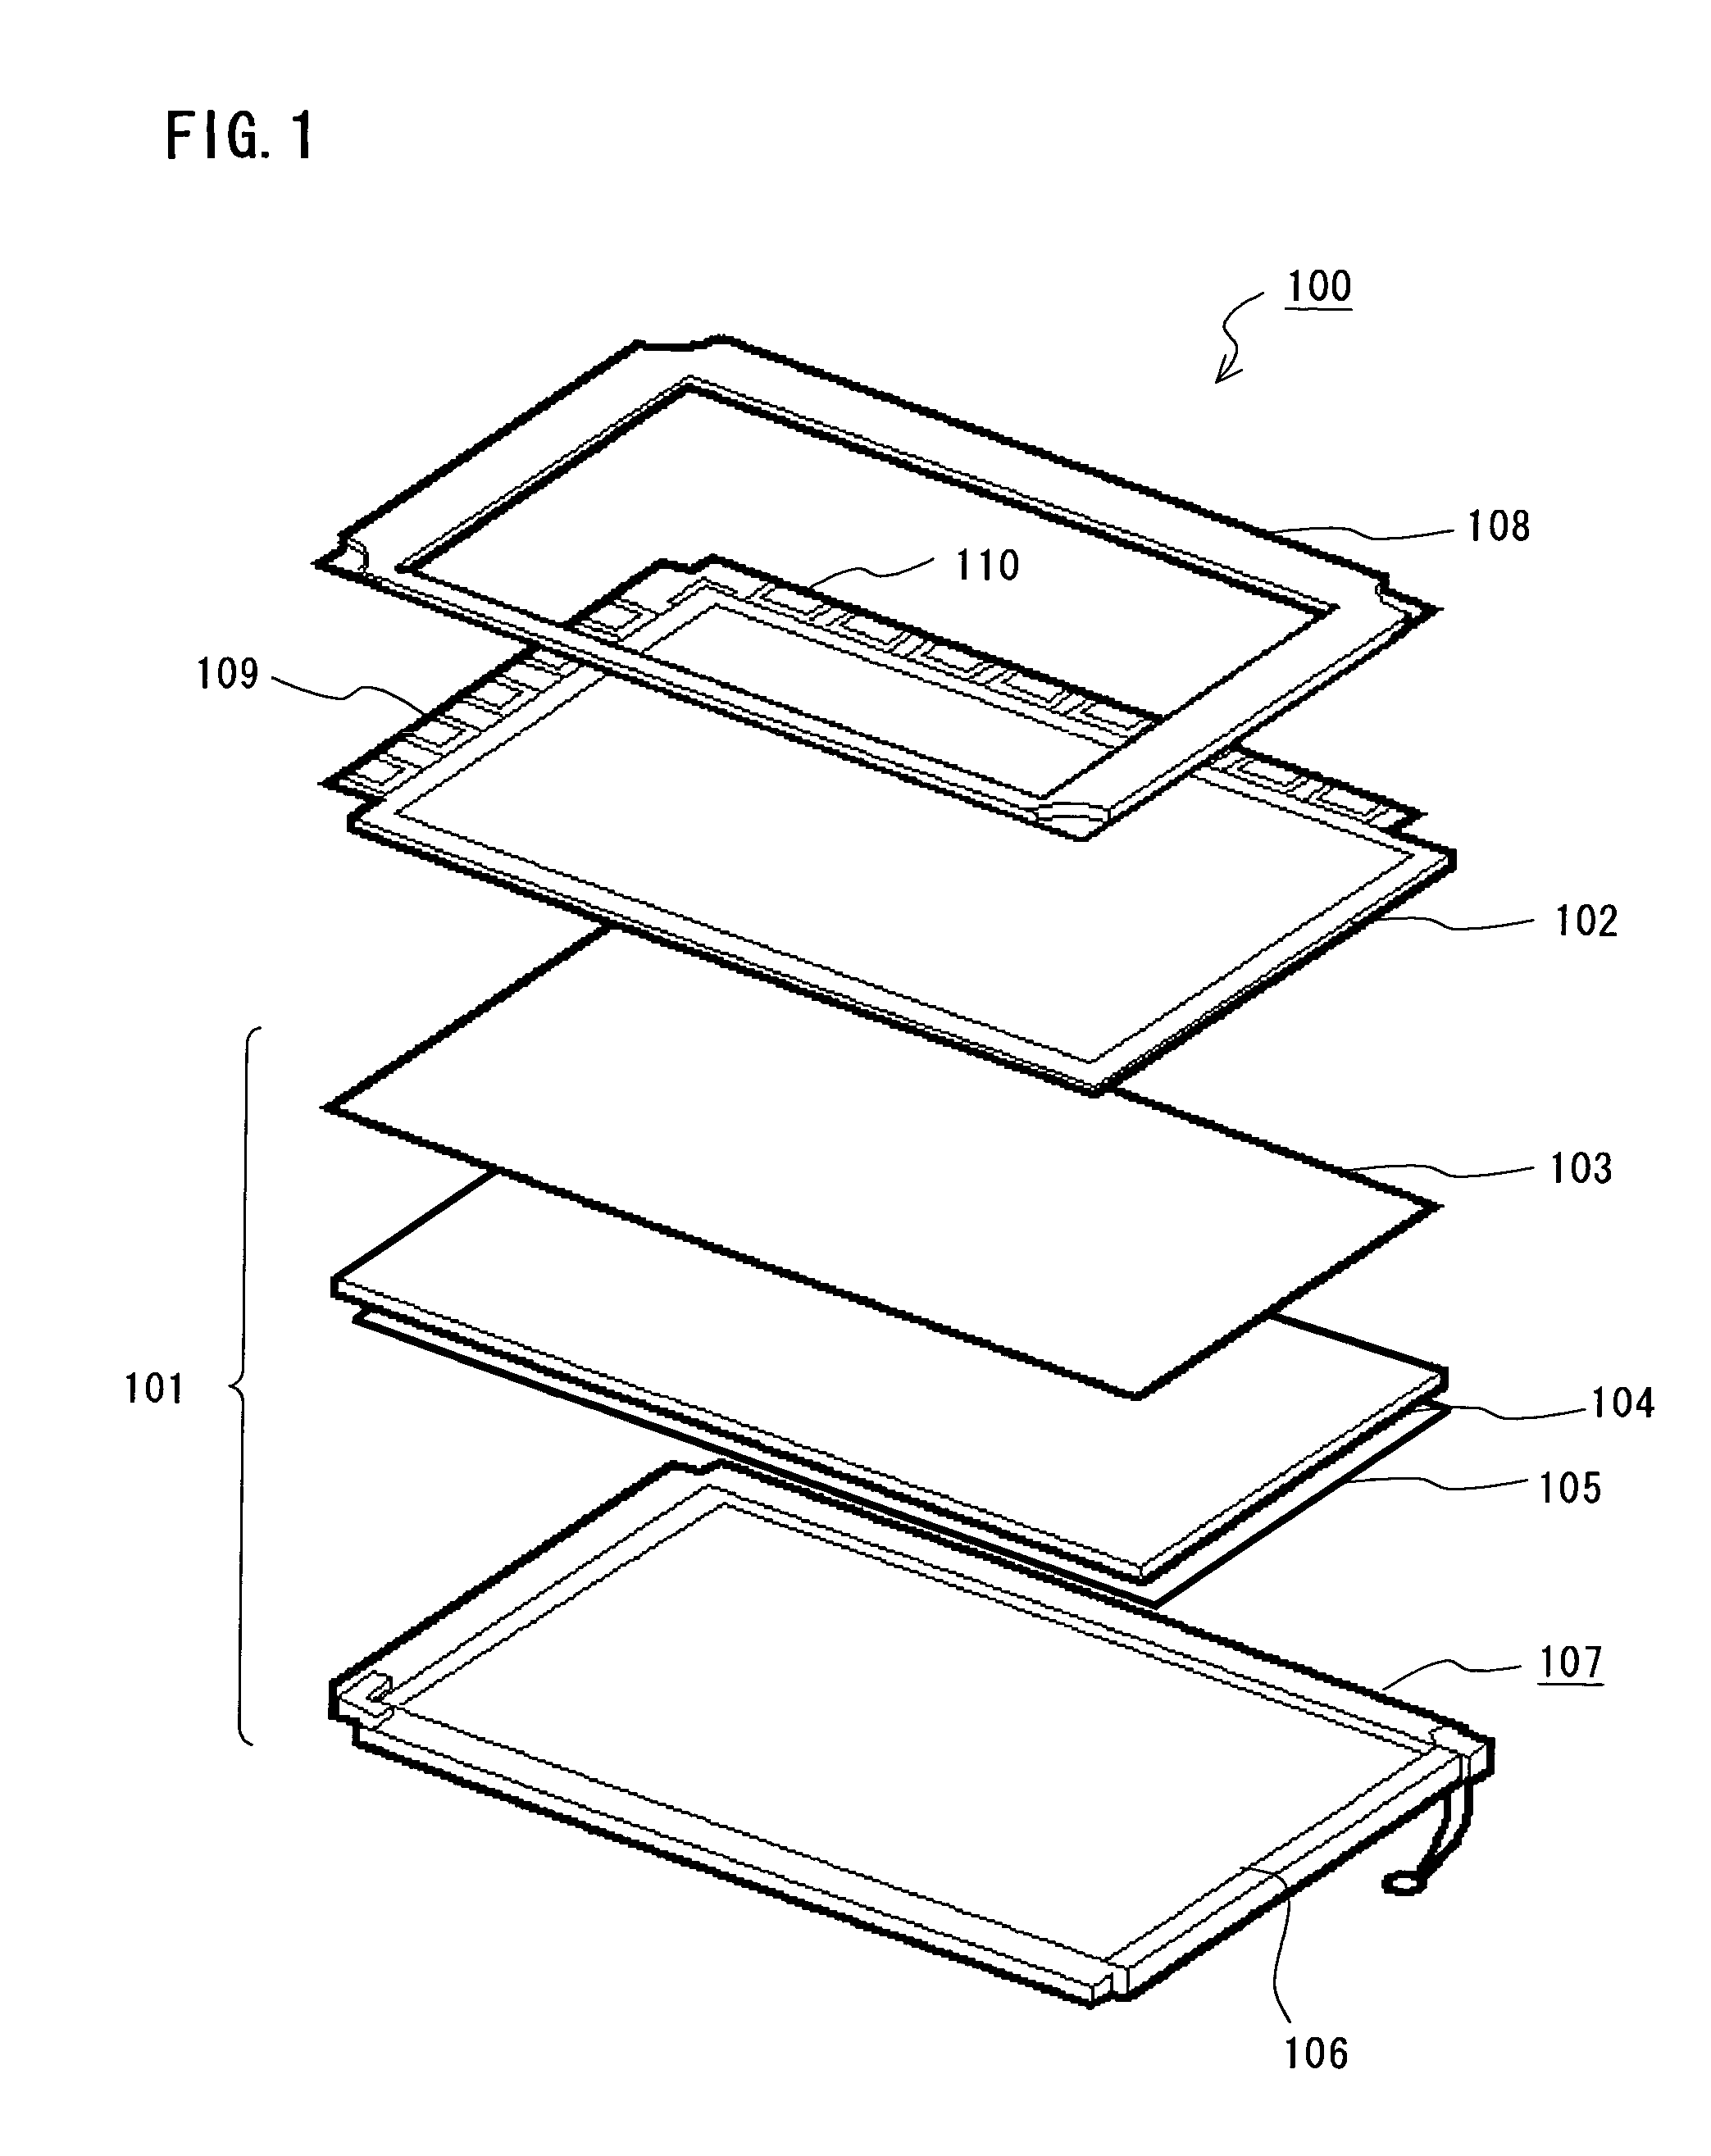 Planar light source unit and display device